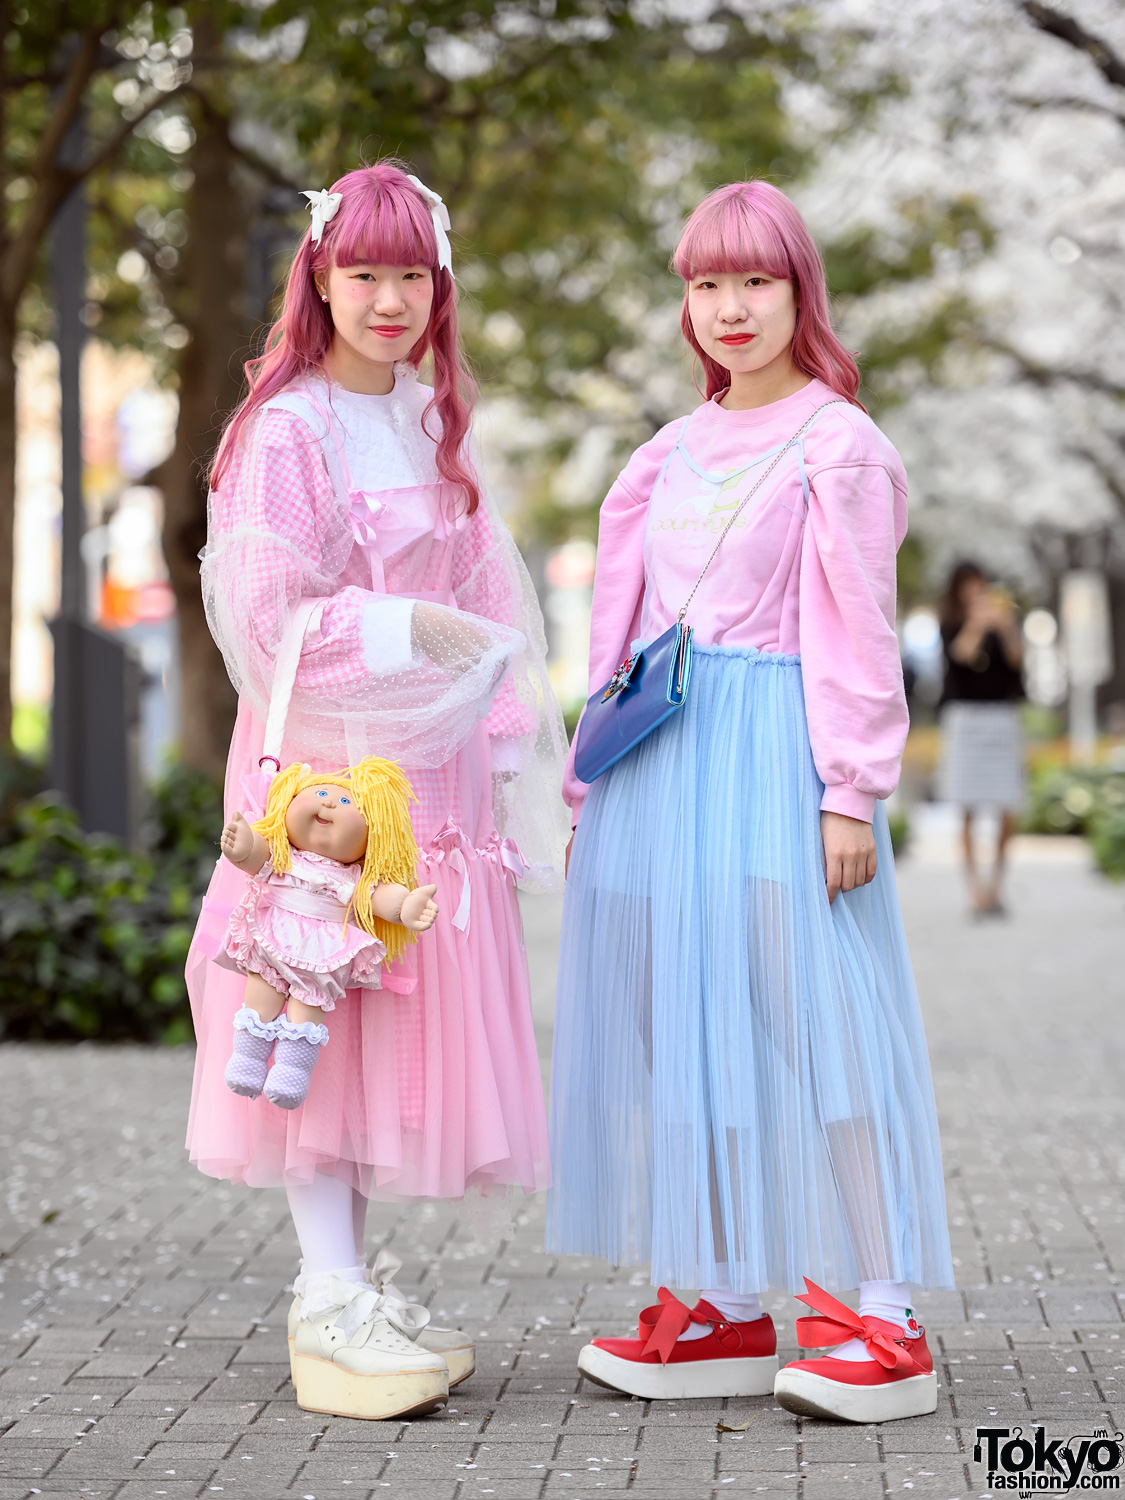 Kawaii Style Japanese Twins in Tokyo w/ Pastel Handmade Fashion, Cabbage Patch Doll & Tokyo Bopper